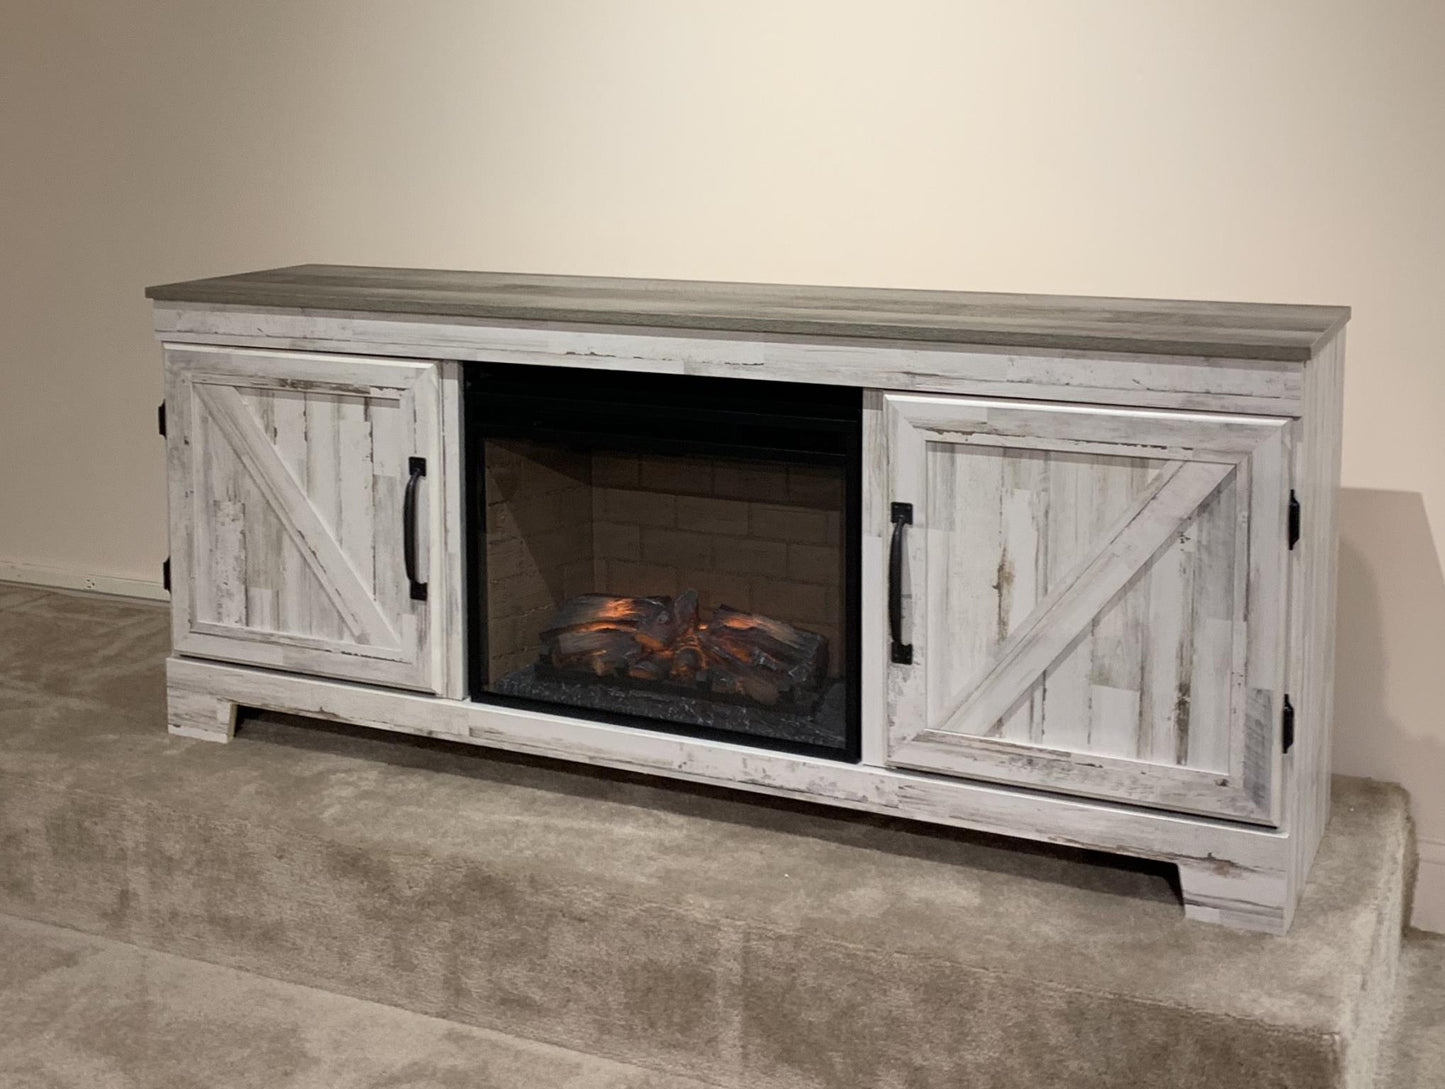 WEEKLY or MONTHLY. Aspen Two Door Entertainment Console